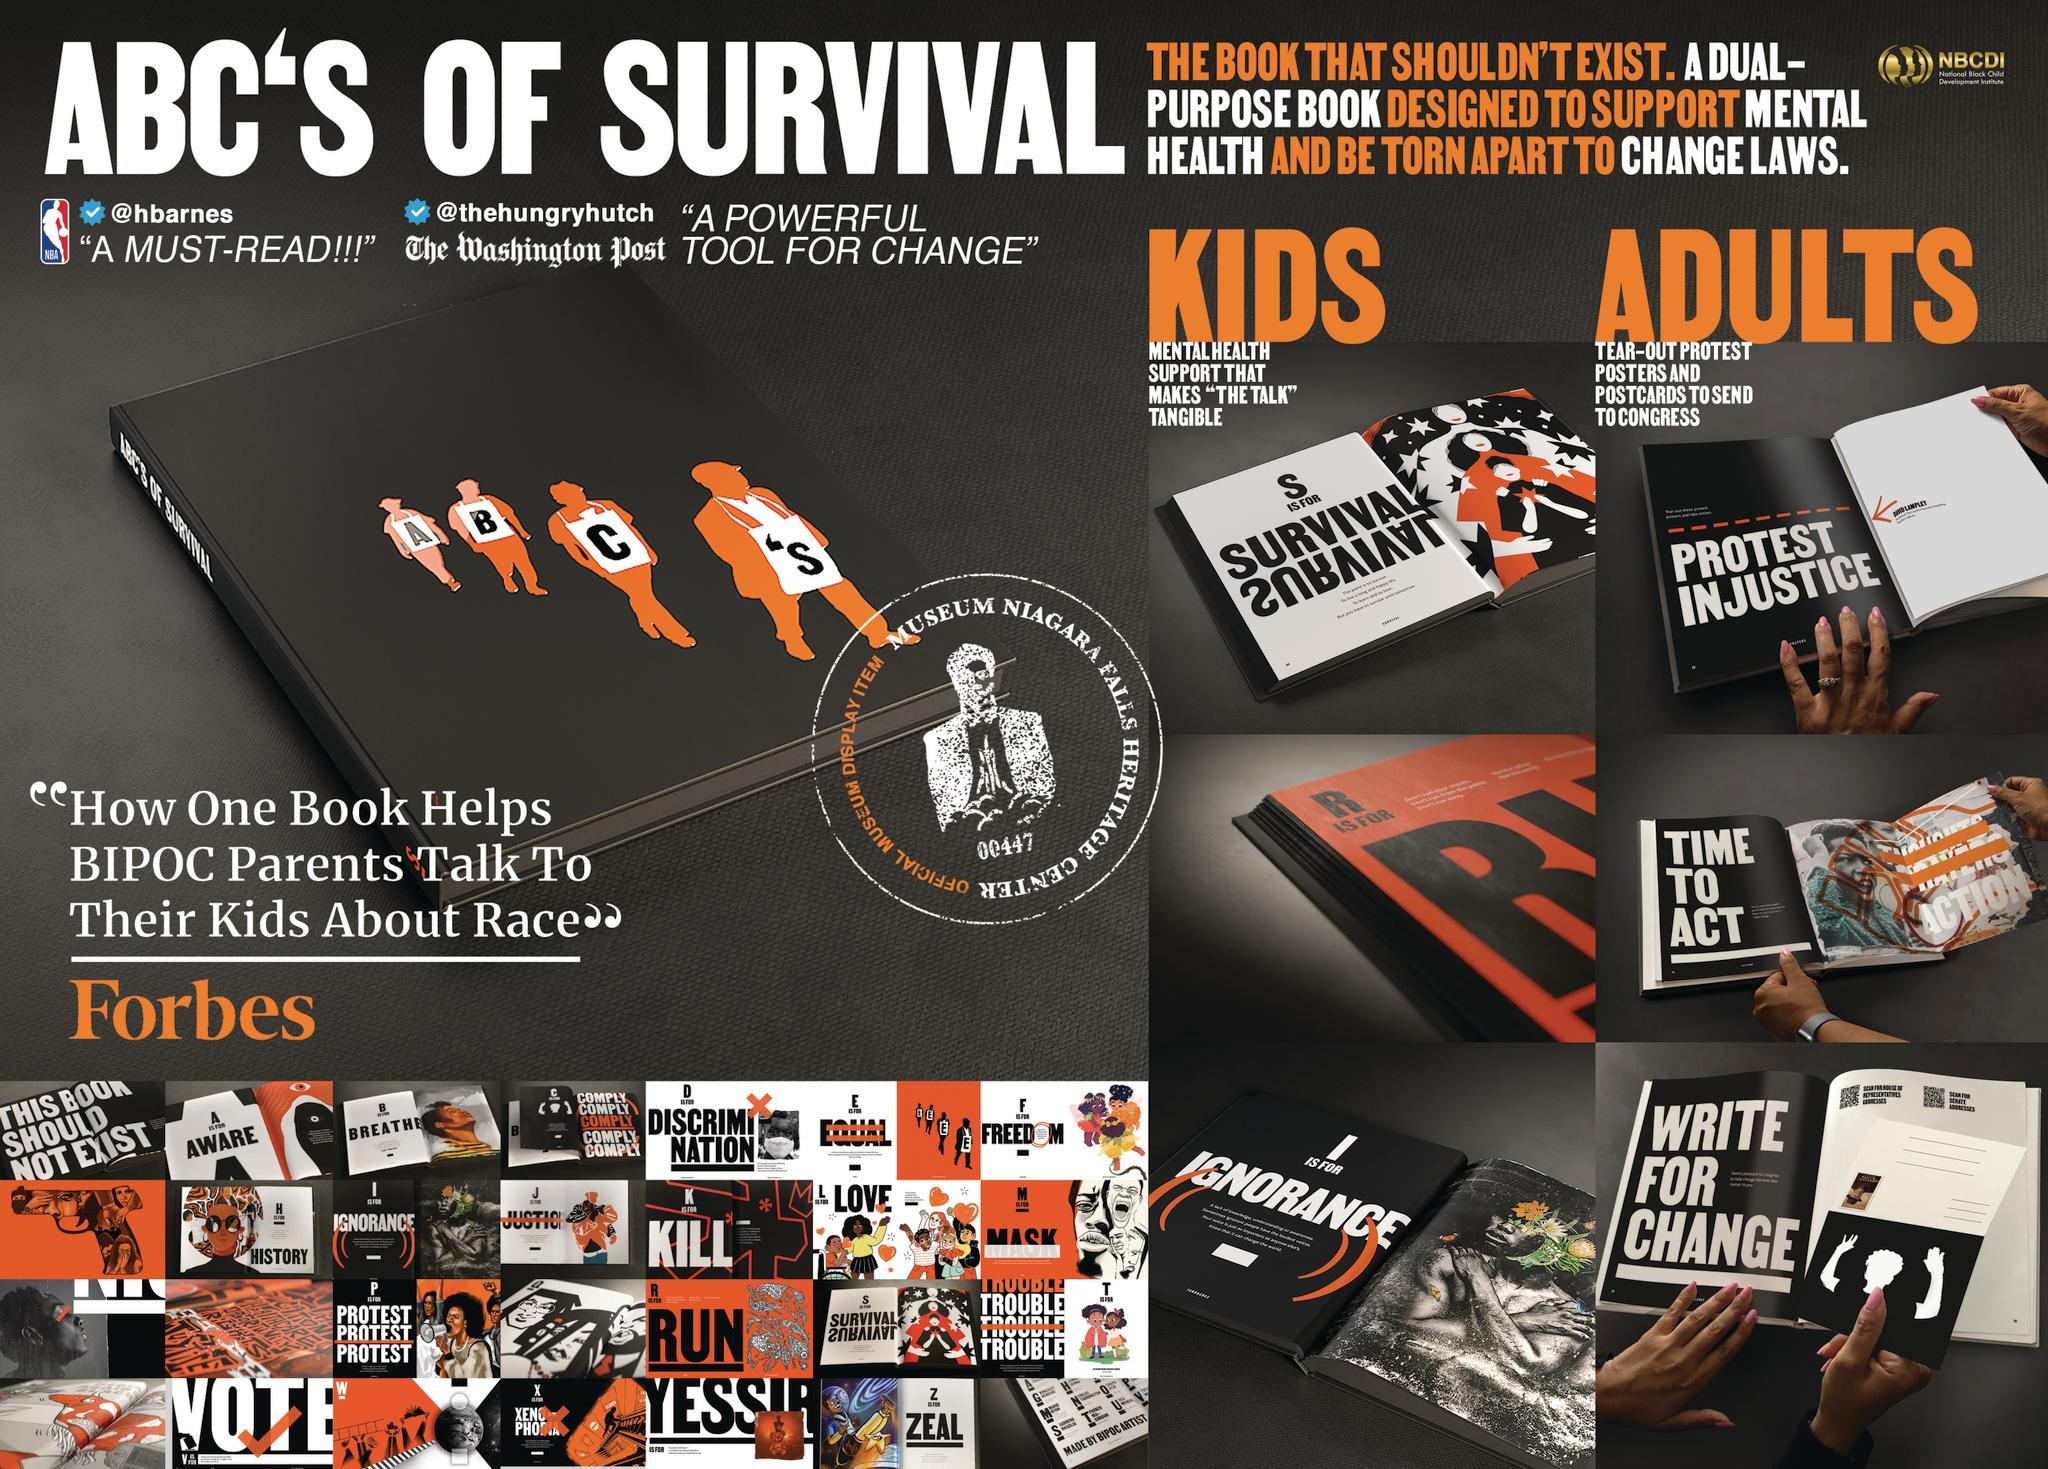 ABCS OF SURVIVAL